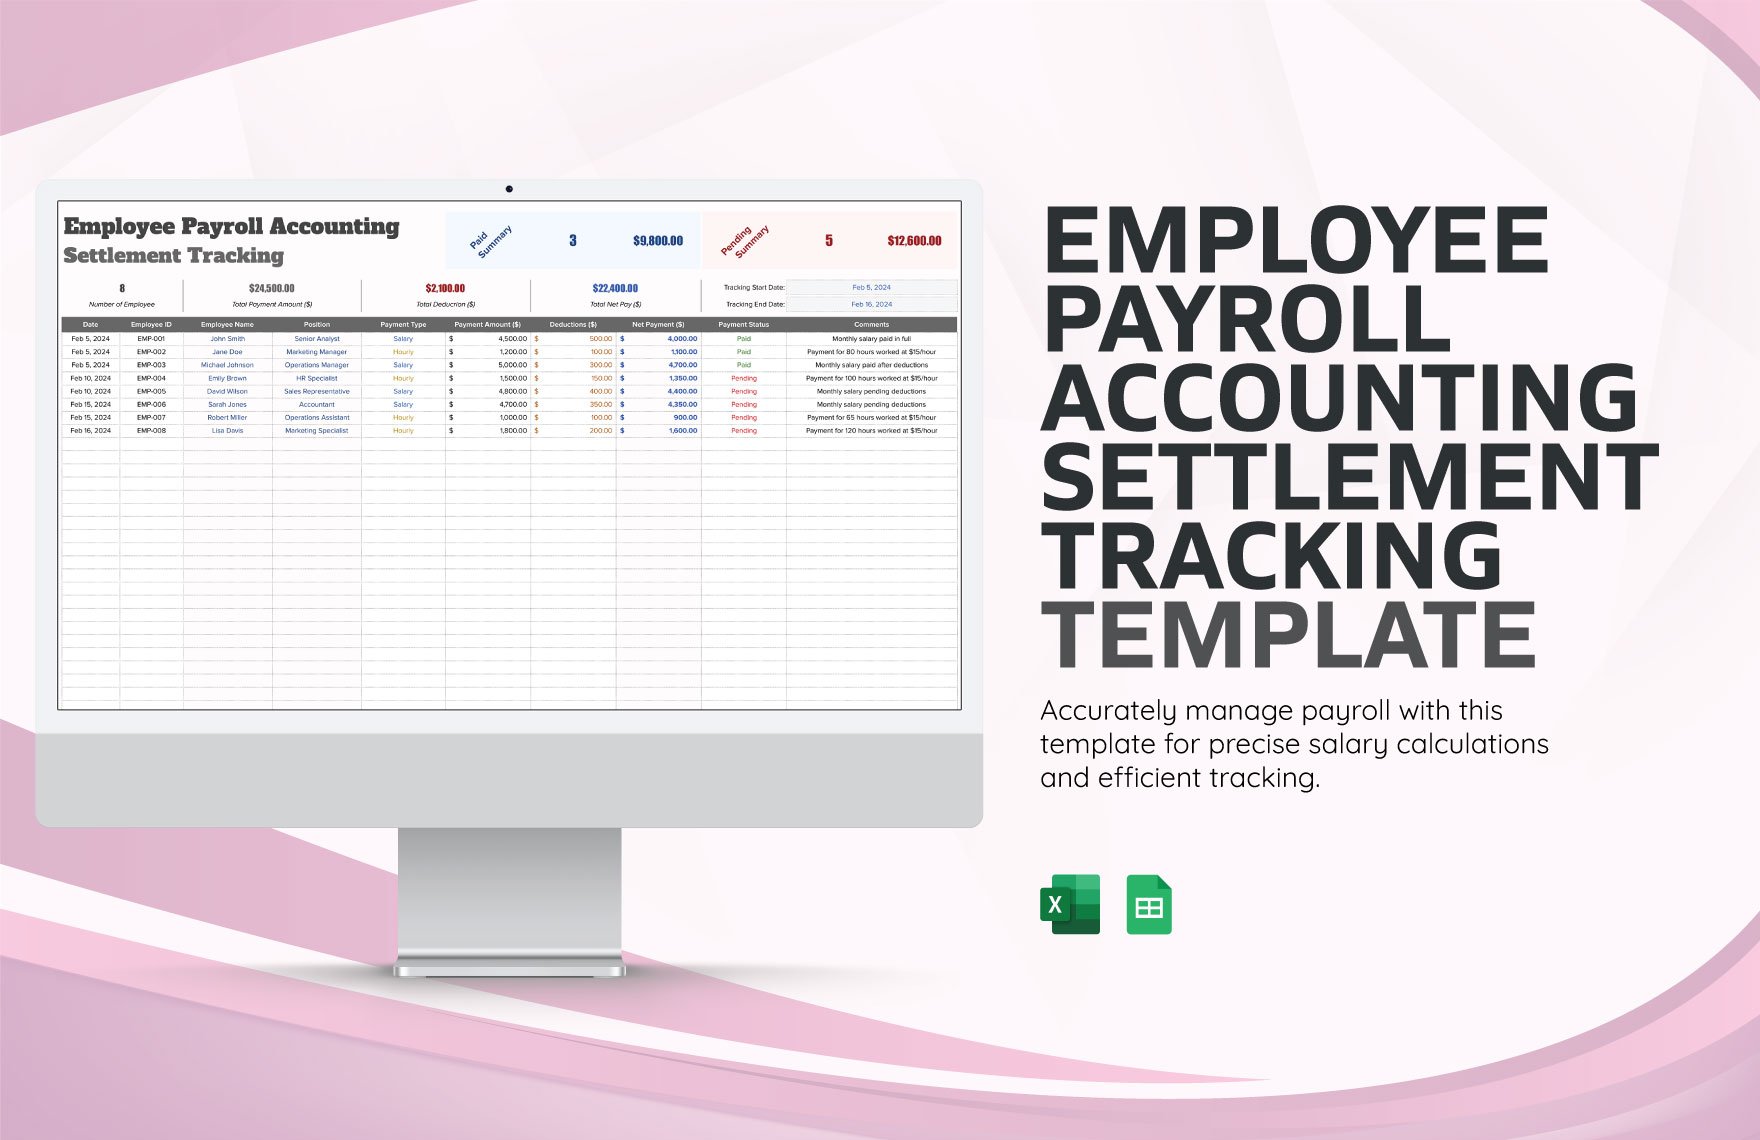 Employee Payroll Accounting Settlement Tracking Template in Excel, Google Sheets